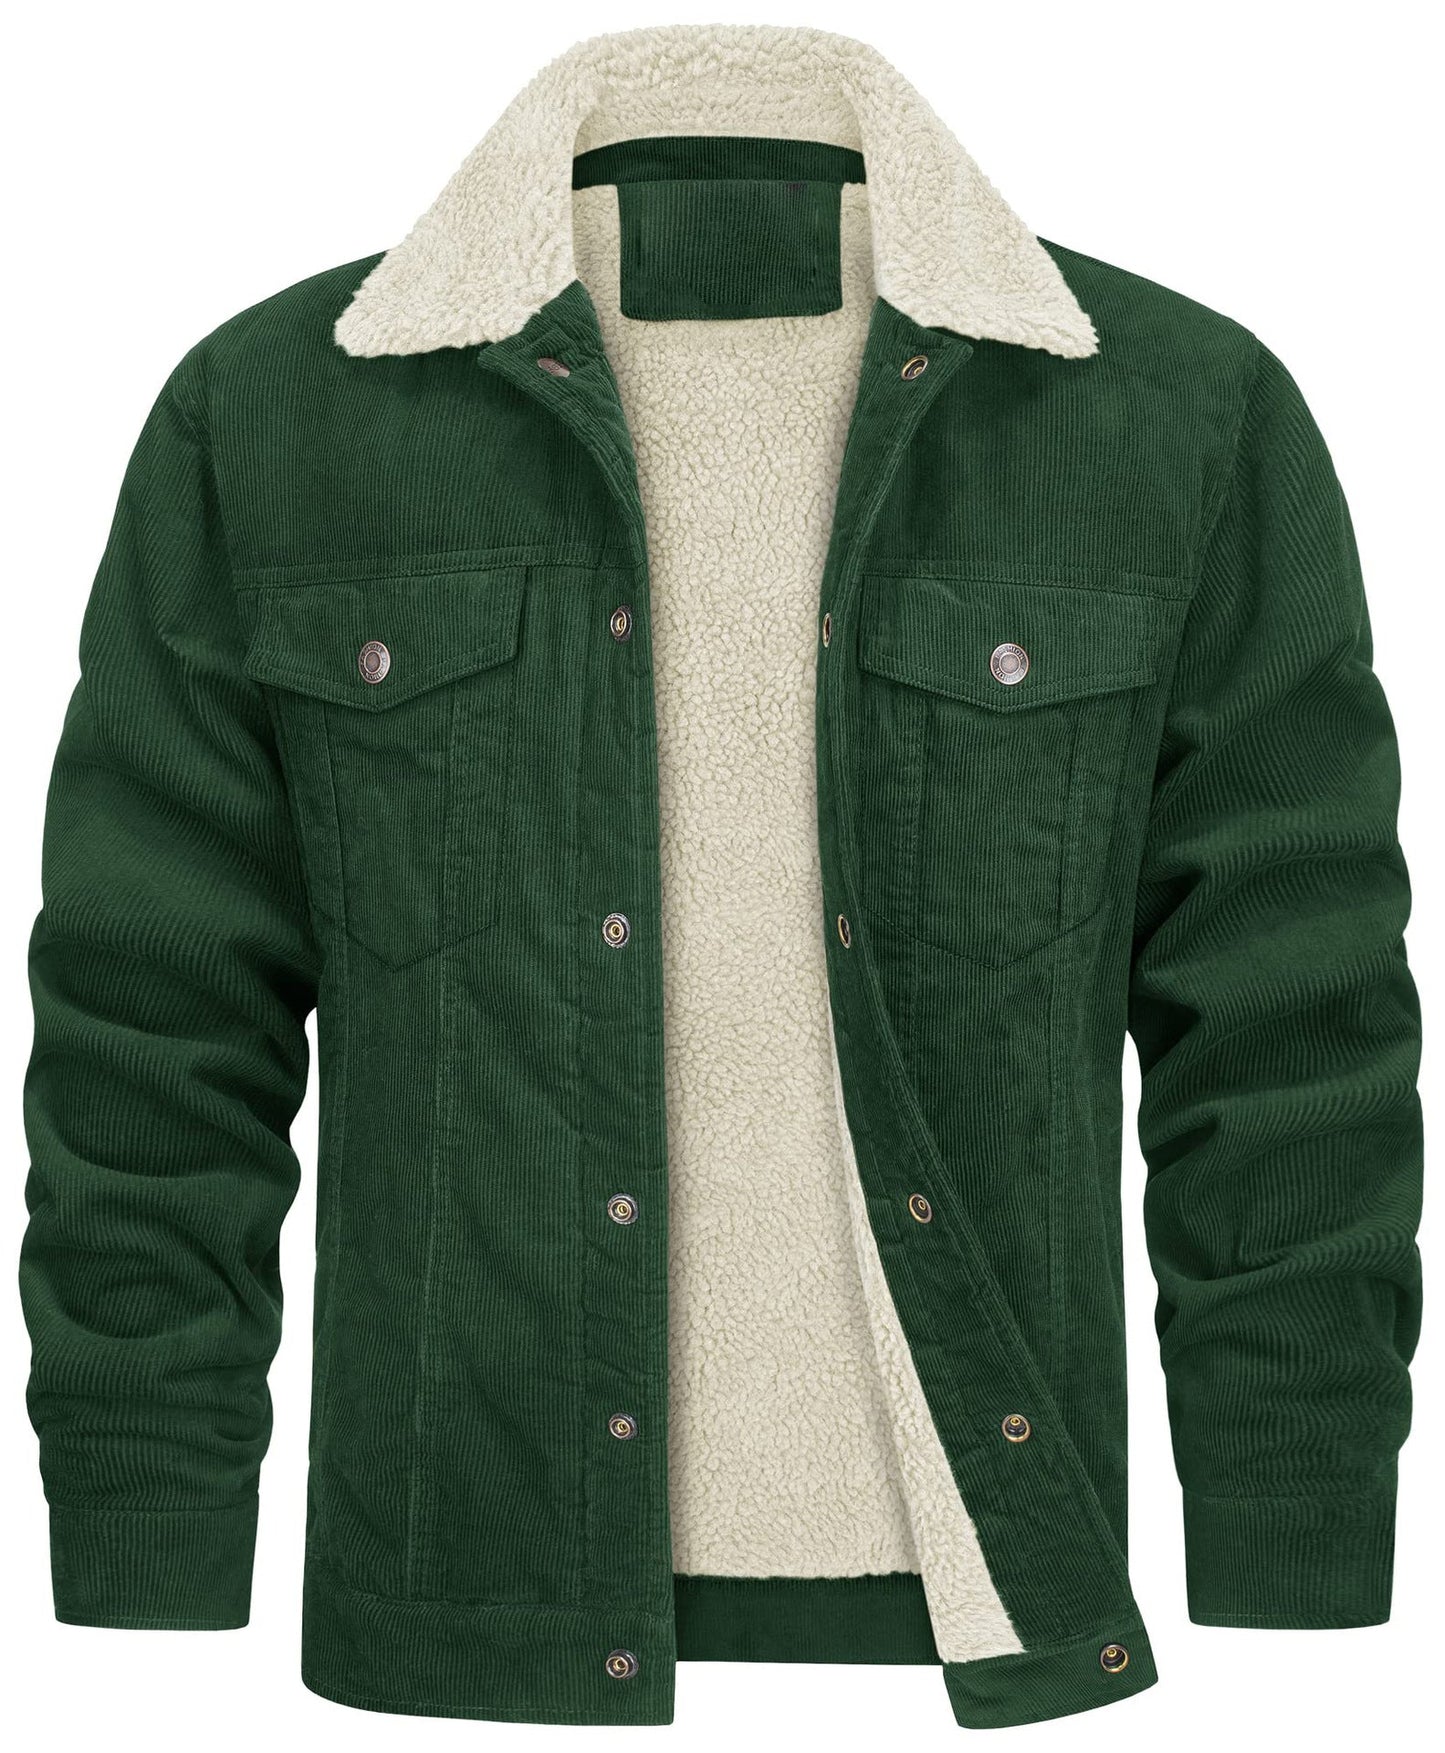 Casual Winter Long Sleeves Velvet Jacket Coats for Men-Coats & Jackets-Green-S-Free Shipping at meselling99